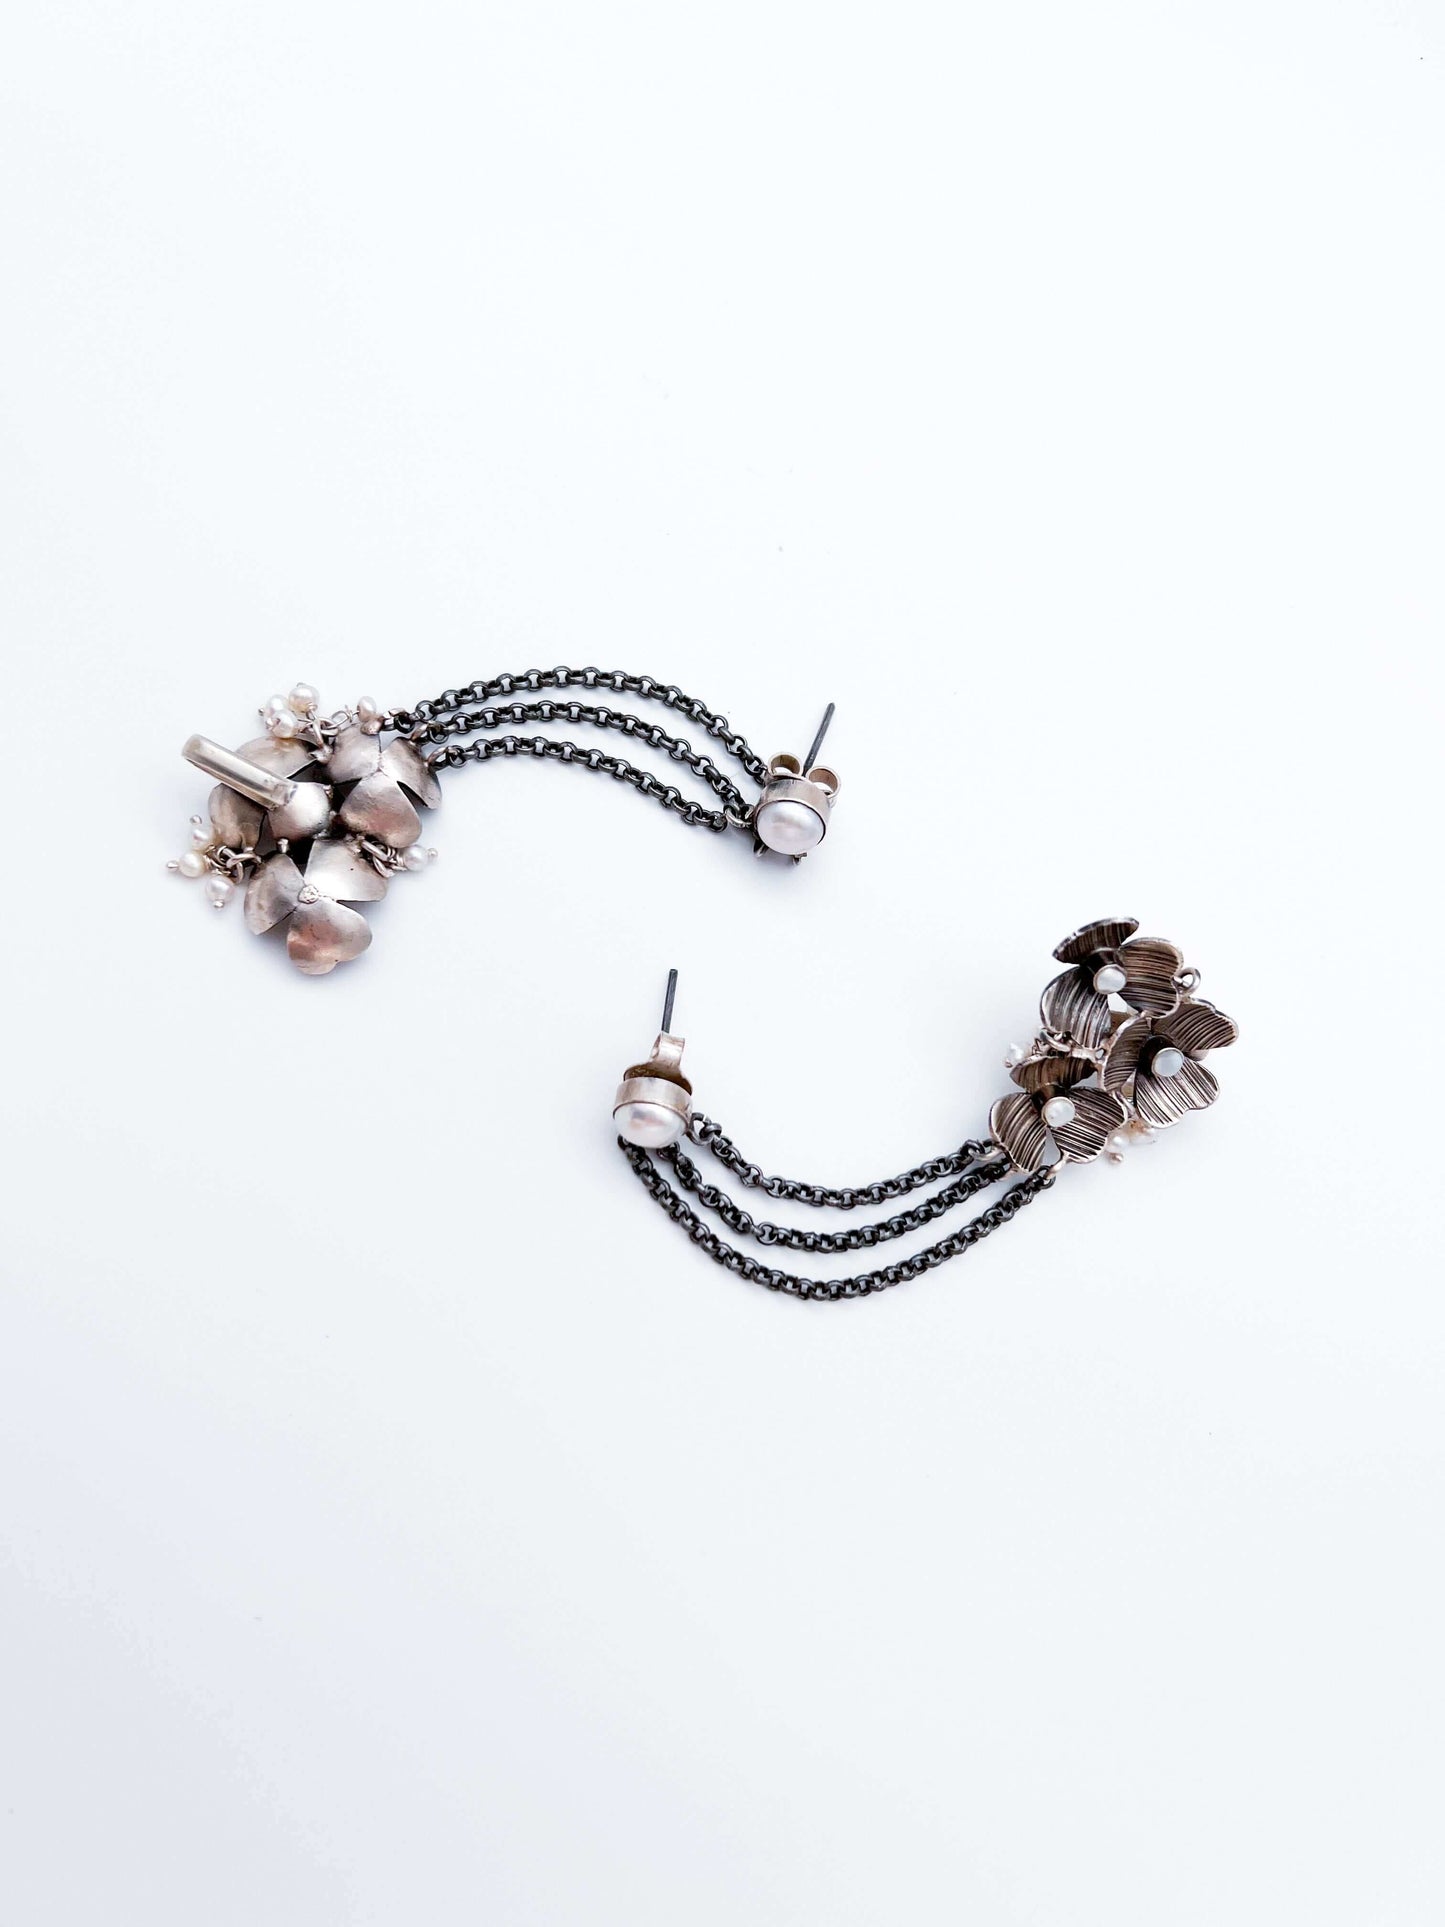 Bahar oxidised silver ear cuffs with natural pearls